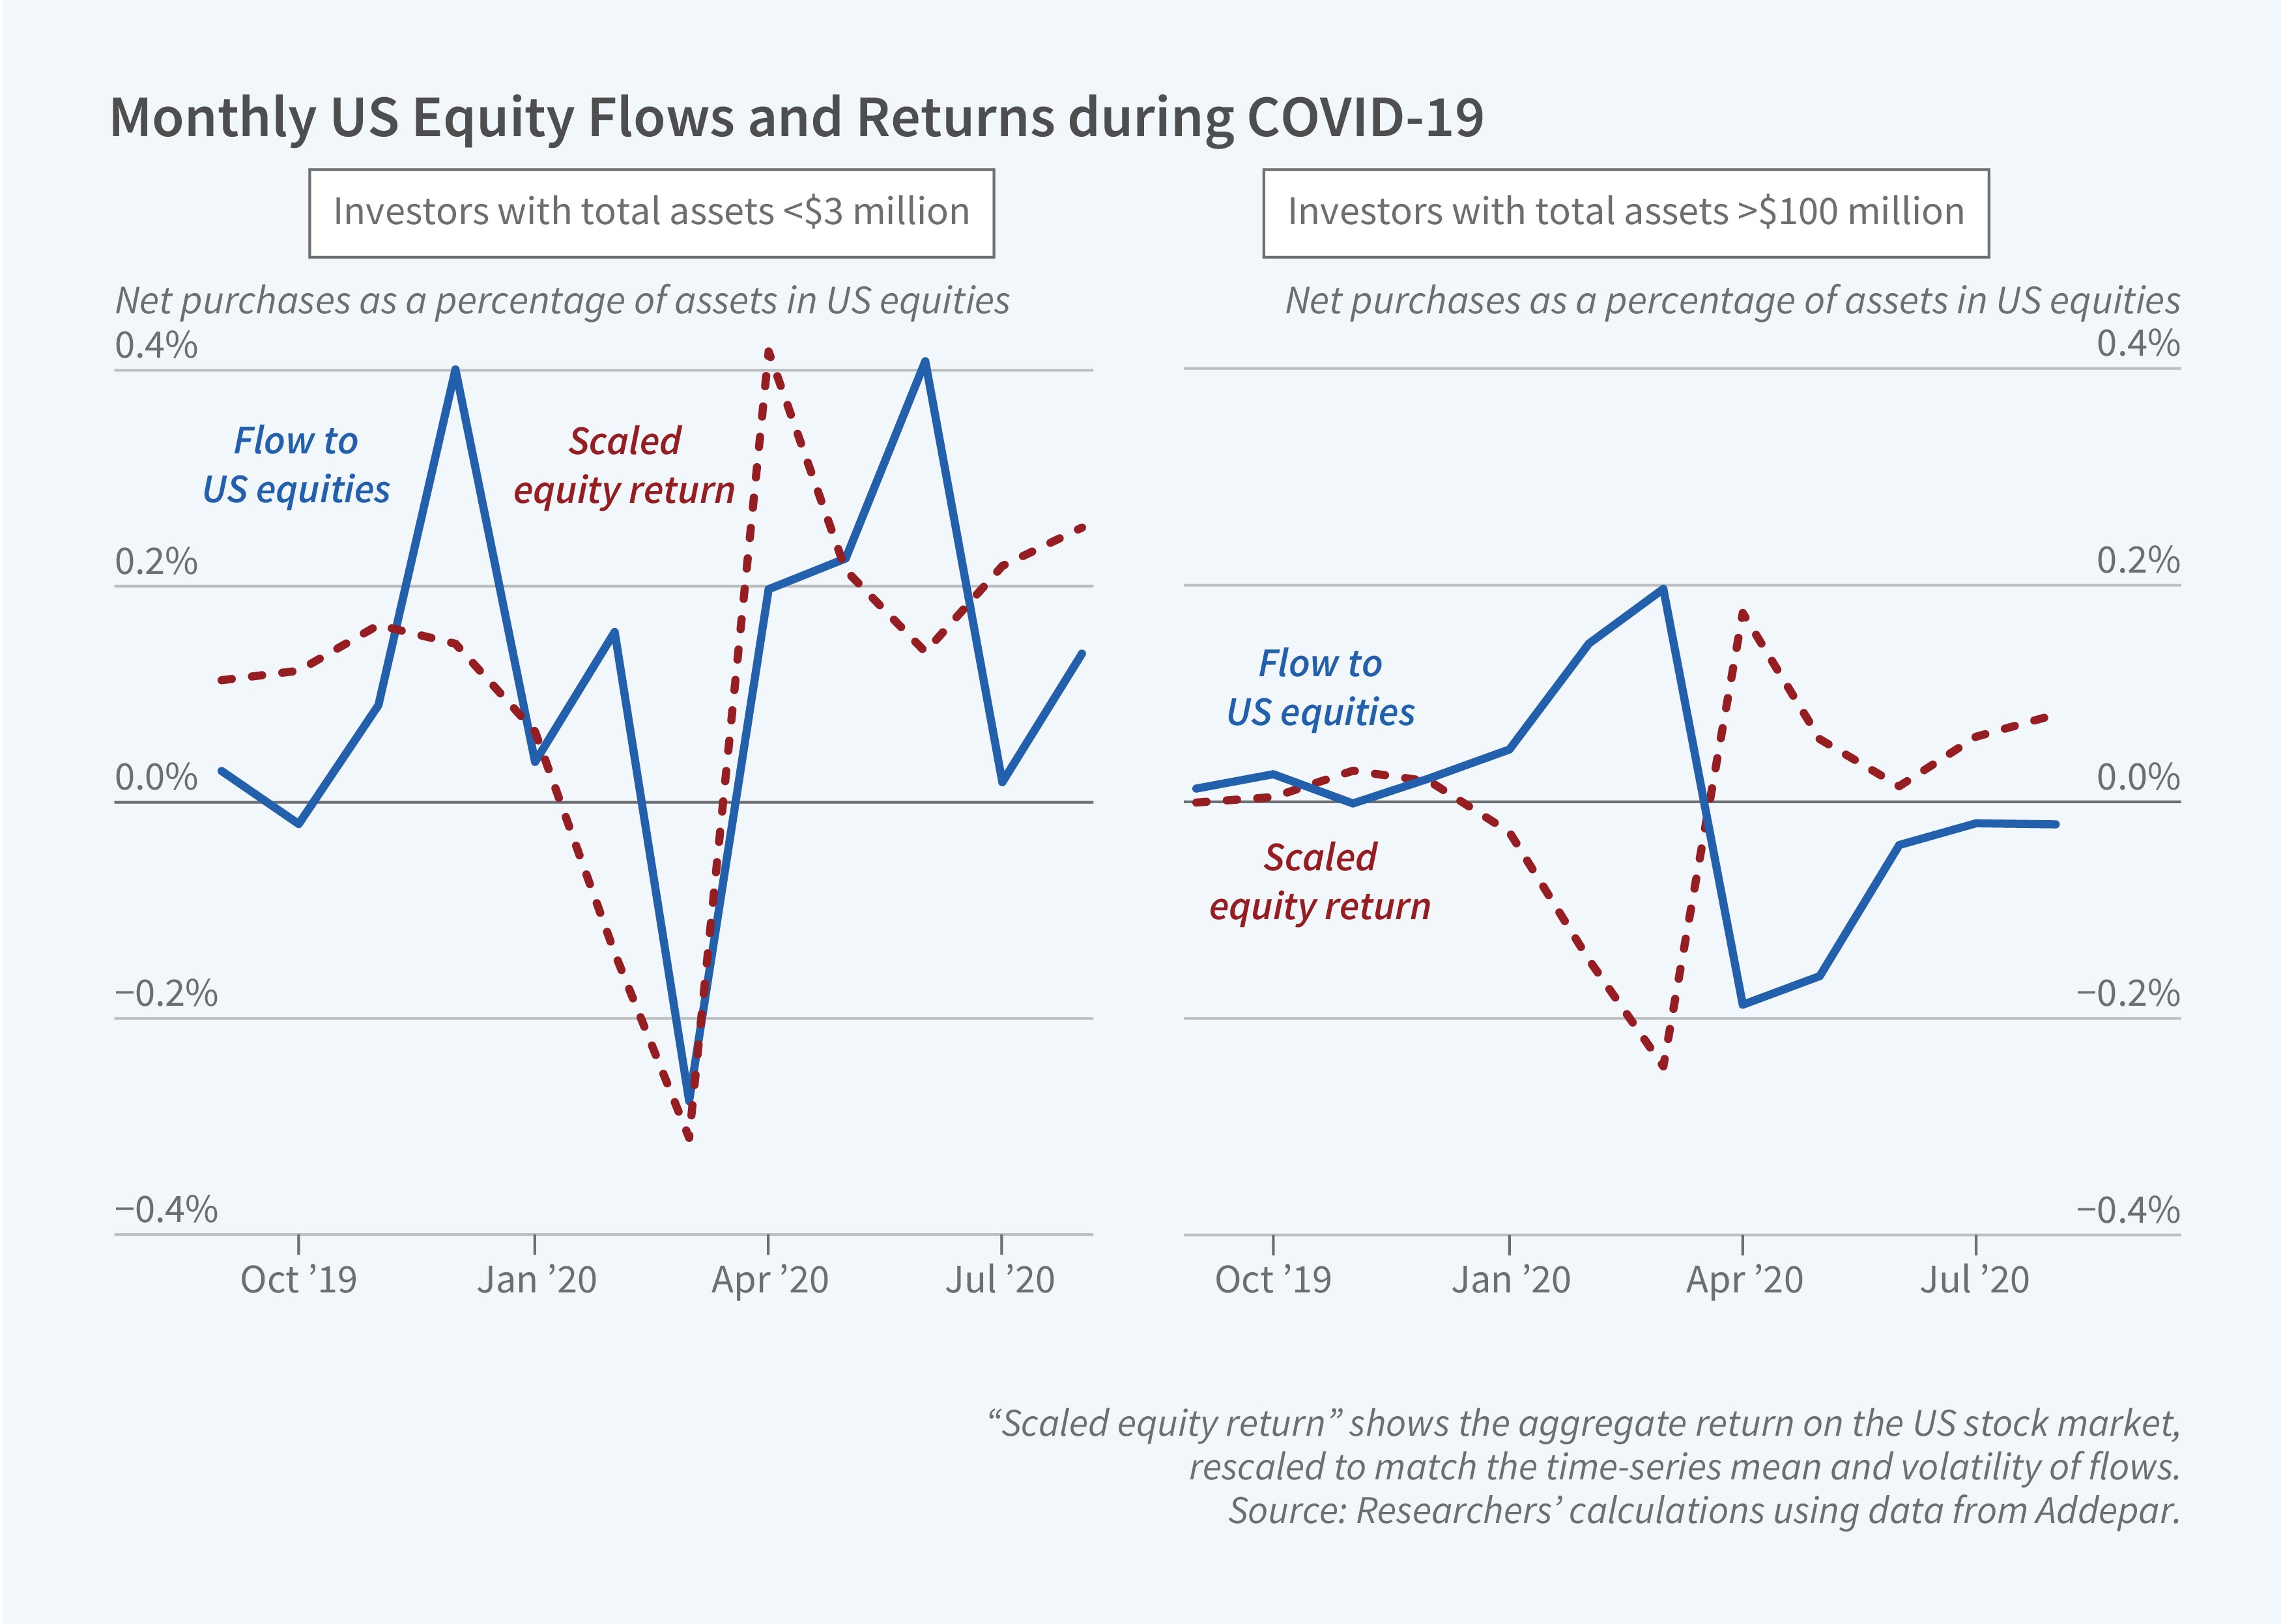 W32001 This figure is a two-panel line graph titled Monthly US Equity Flows and Returns during COVID-19. The y-axis on both panels is labeled, net purchases a percentage of assets in US equities. It ranges from negative 0.4% to 0.4%, increasing in increments of 0.2.  The x-axis on both panels is time, ranging from October 2019 to July 2020. Both panels have line graphs that show two lines: Flow to US equities and Scaled equity return. The left panel is titled "Investors with total assets less than 3 million dollars." In this graph, the "Flow to US equities" line begins at 0, spikes to 0.4%, drops to -0.3% in March 2020, and then rebounds to 0.4% in June 2020. The "Scaled equity return" line starts at 0.1%, dips to -0.3% in March 2020, spikes to 0.4% in April 2020, and then declines to around 0.2% by June 2020. The right panel is titled "Investors with total assets exceeding 100 million dollars." In this graph, the "Flow to US equities" and "Scaled equity return" lines are nearly inverted. They hover around 0 until January 2020, when they diverge. The "Scaled equity return" line drops to -0.2% in March 2020, while the "Flow to US equities" line spikes to 0.2%. In April 2020, they invert, with the "Scaled equity return" line spiking to 0.2% and the "Flow to US equities" line dropping to -0.2%. Both lines then converge towards 0. The note of the figure reads, “Scaled equity return” shows the aggregate return on the US stock market, rescaled to math the time-series mean and volatility of flows. The source line reads, Source: Researchersʼ calculations using data from Addepar.